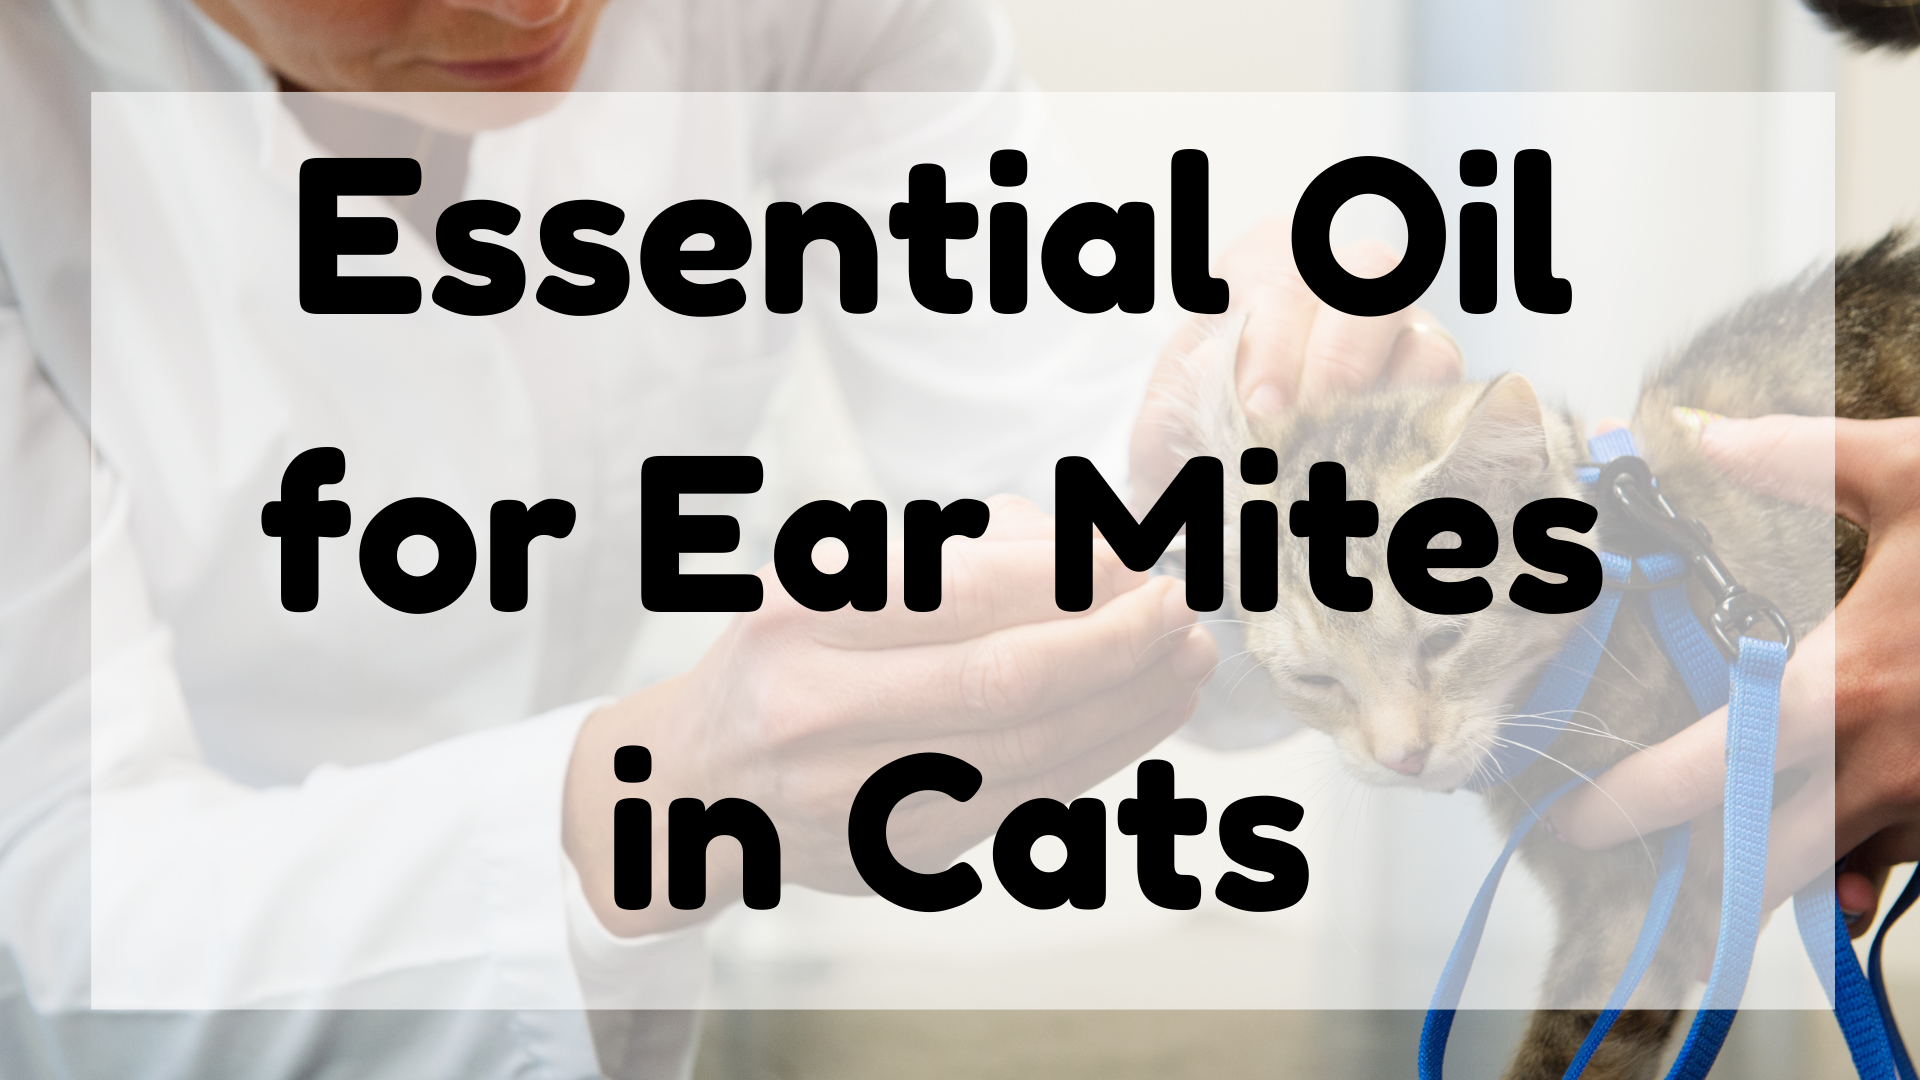 Essential Oil for Ear Mites in Cats featured image